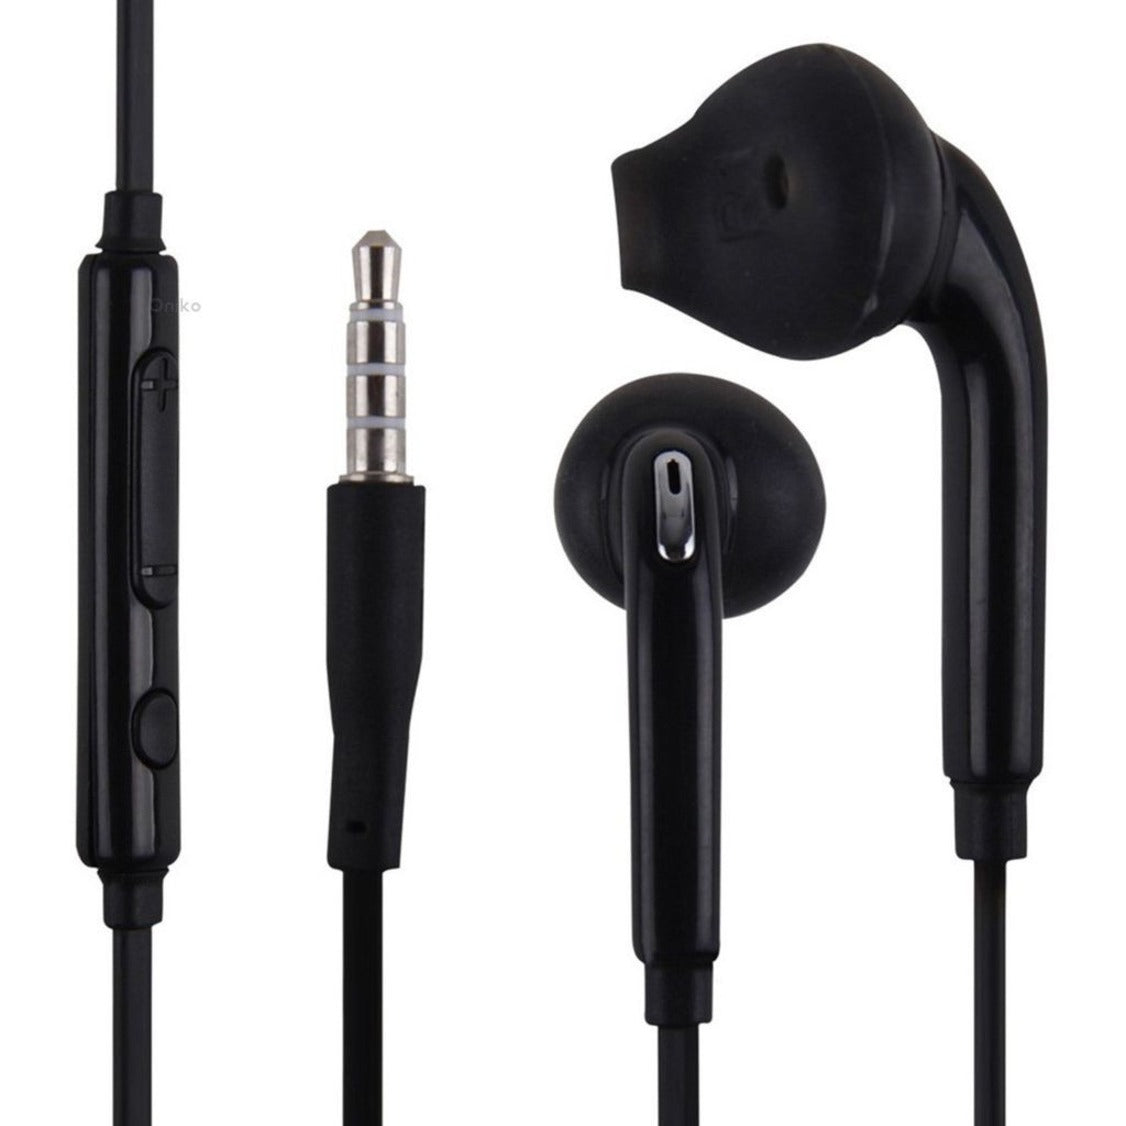 4XEM 4XSAMEARBK Replacement Earbud For Samsung, Noise Isolation, Tangle Resistant Cable, Black